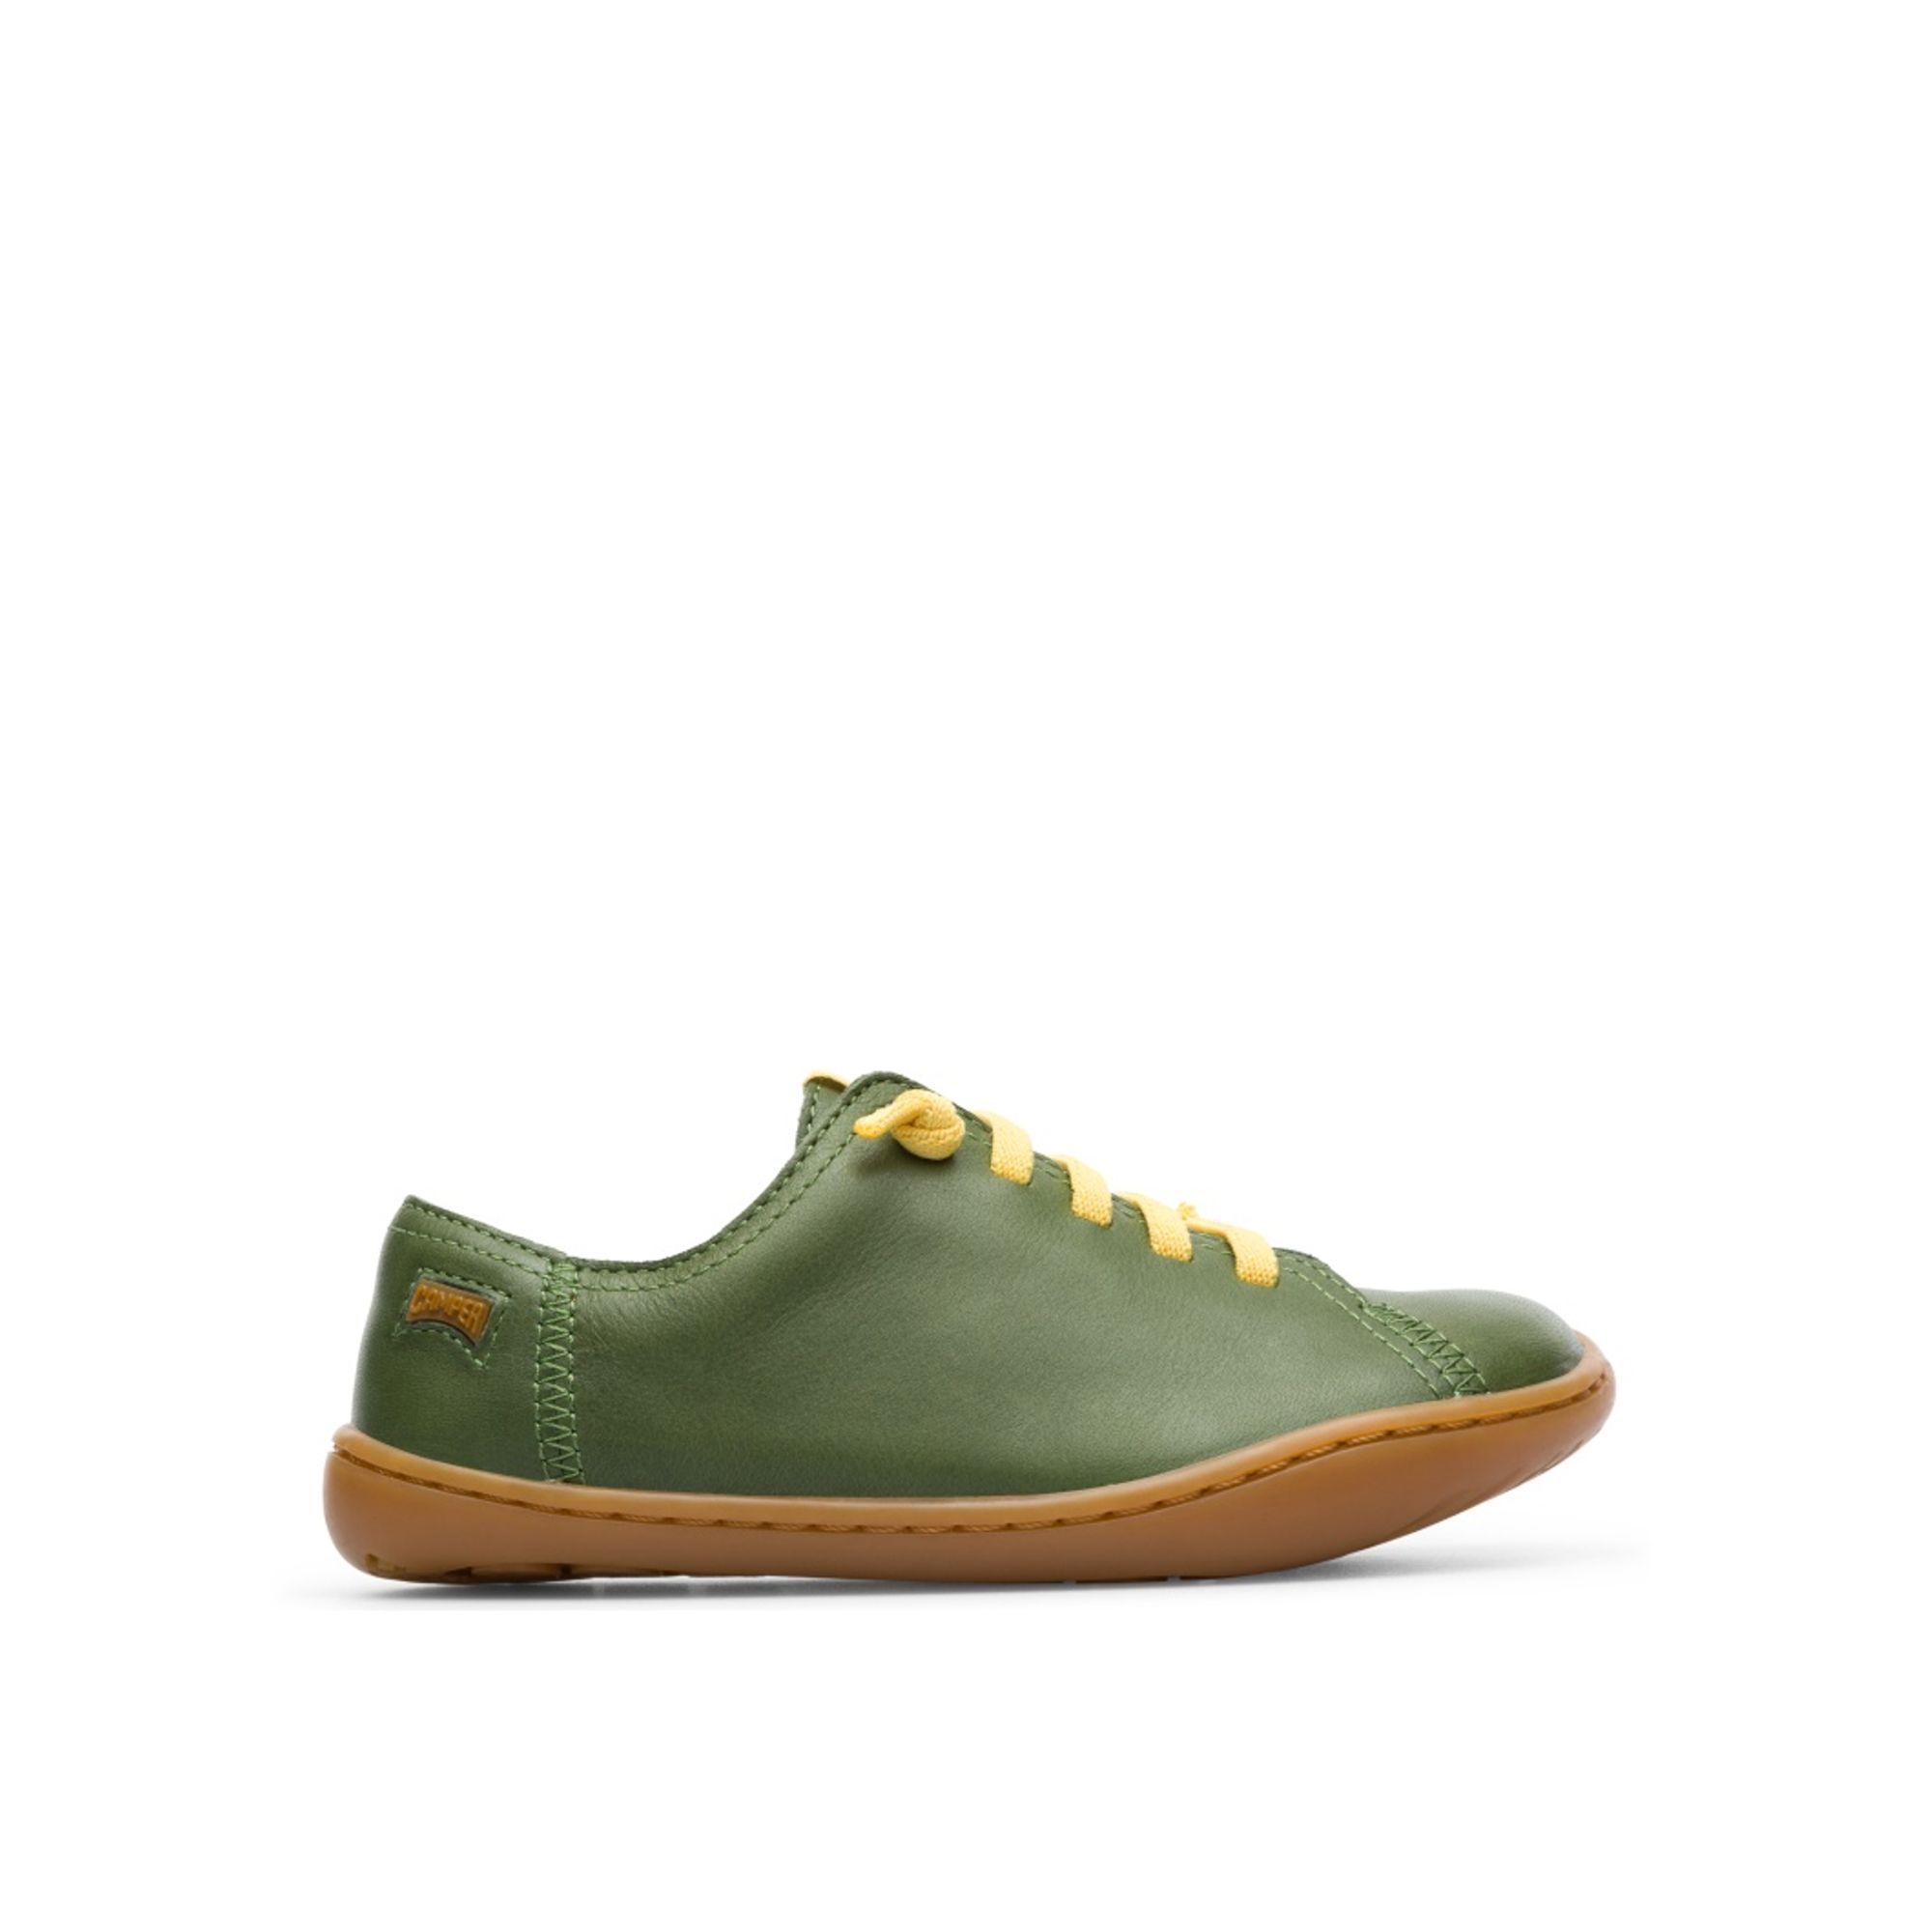 Green shoe for kids. 100% vegetal tanned leather upper with yellow elastic laces for contrast. 100% brown rubber outsole.

A Little Better, Never Perfect 

Our Peu kids' shoes follow the natural curve of small feet and feature elastic zigzag laces that won’t come undone. The 360º stitched outsole and ergonomic sole offer flexibility and protection no matter what they get into.